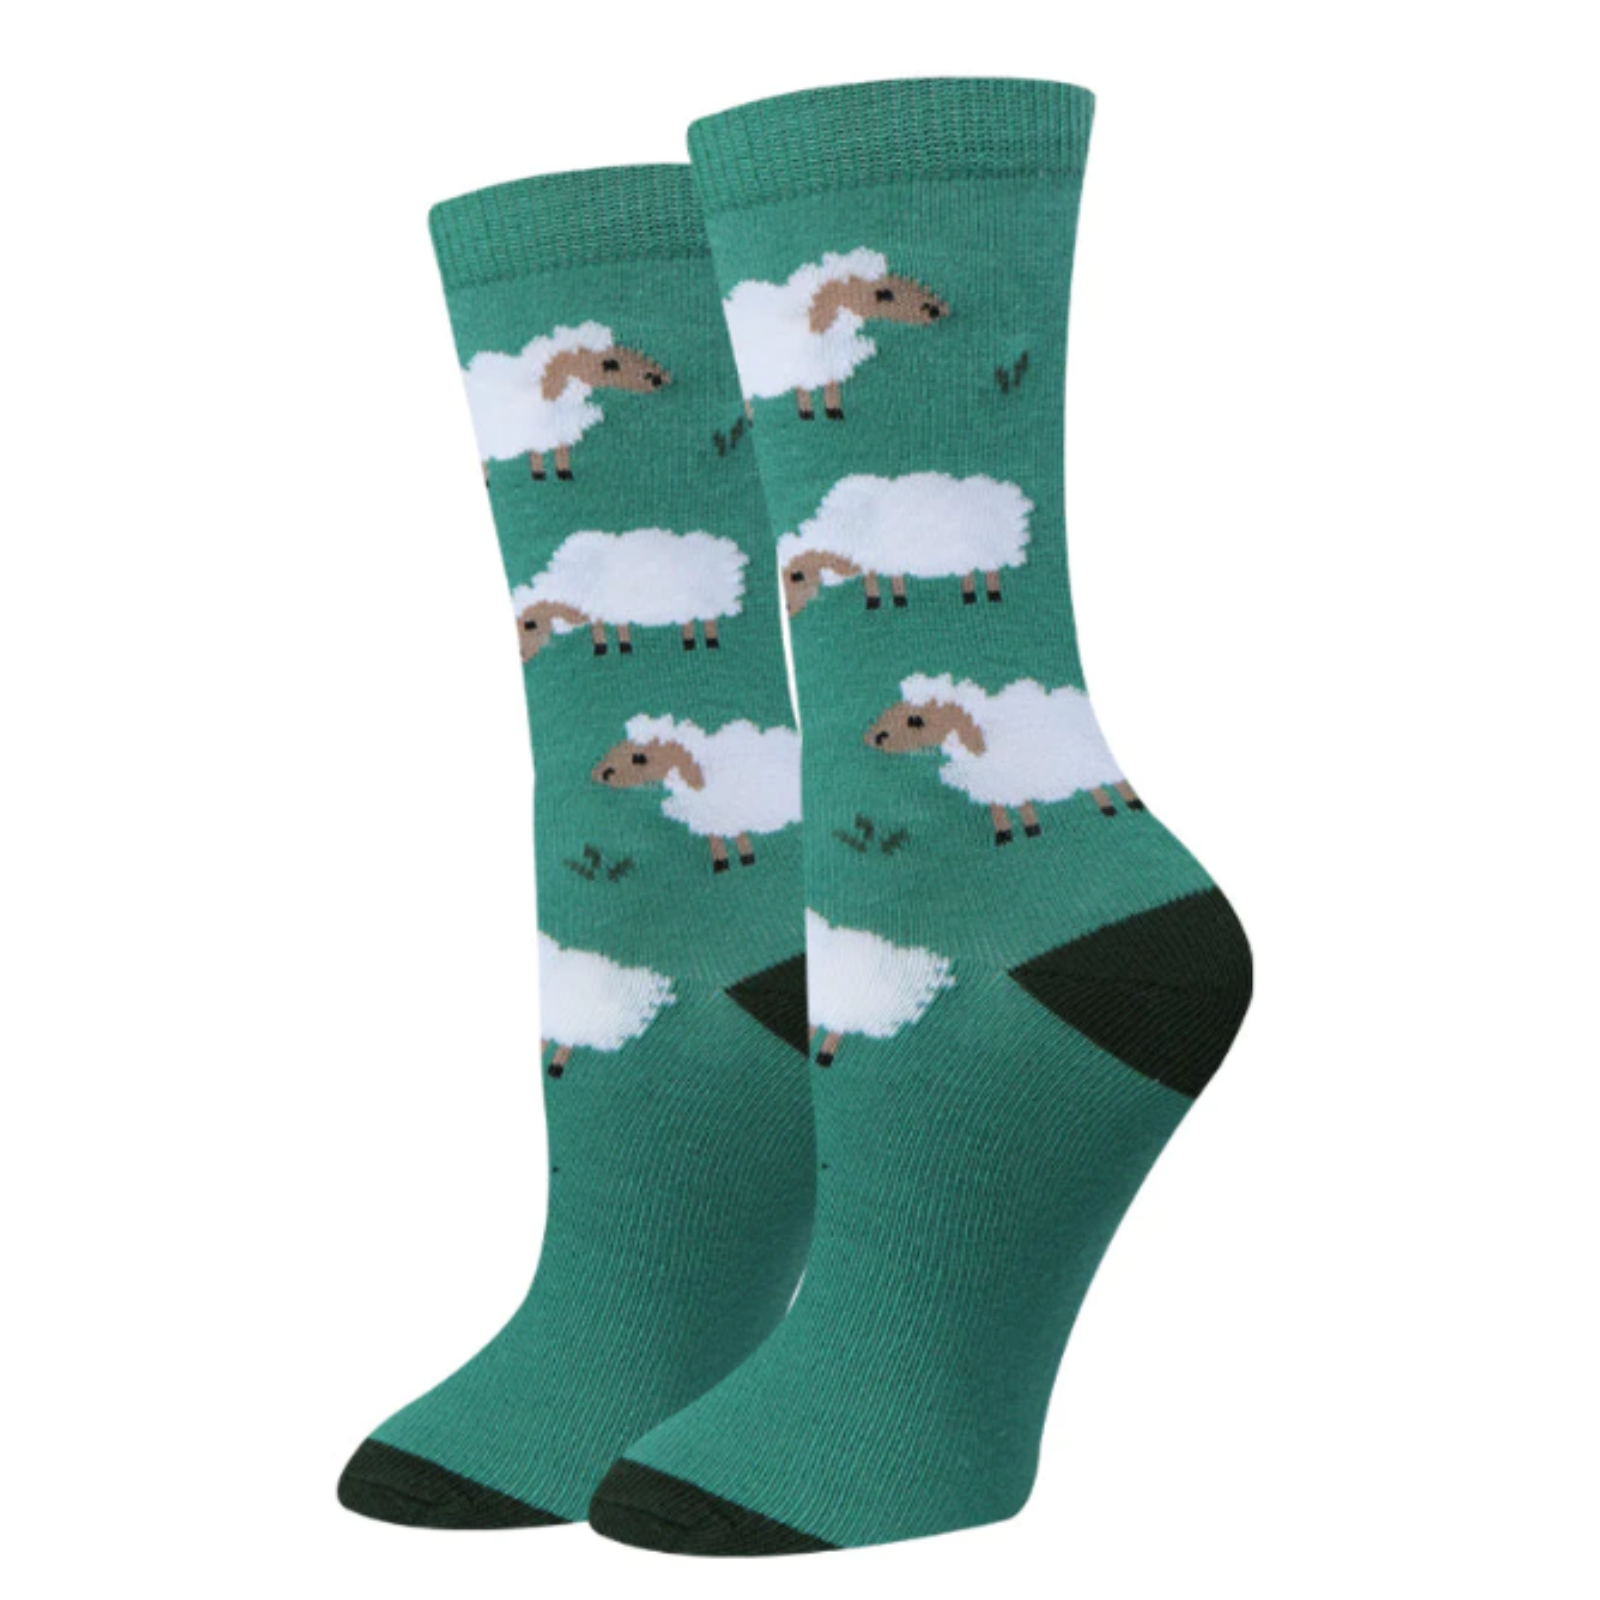 Sock Harbor Black Sheep women's sock featuring green sock with white sheep and one black sheep on display feet